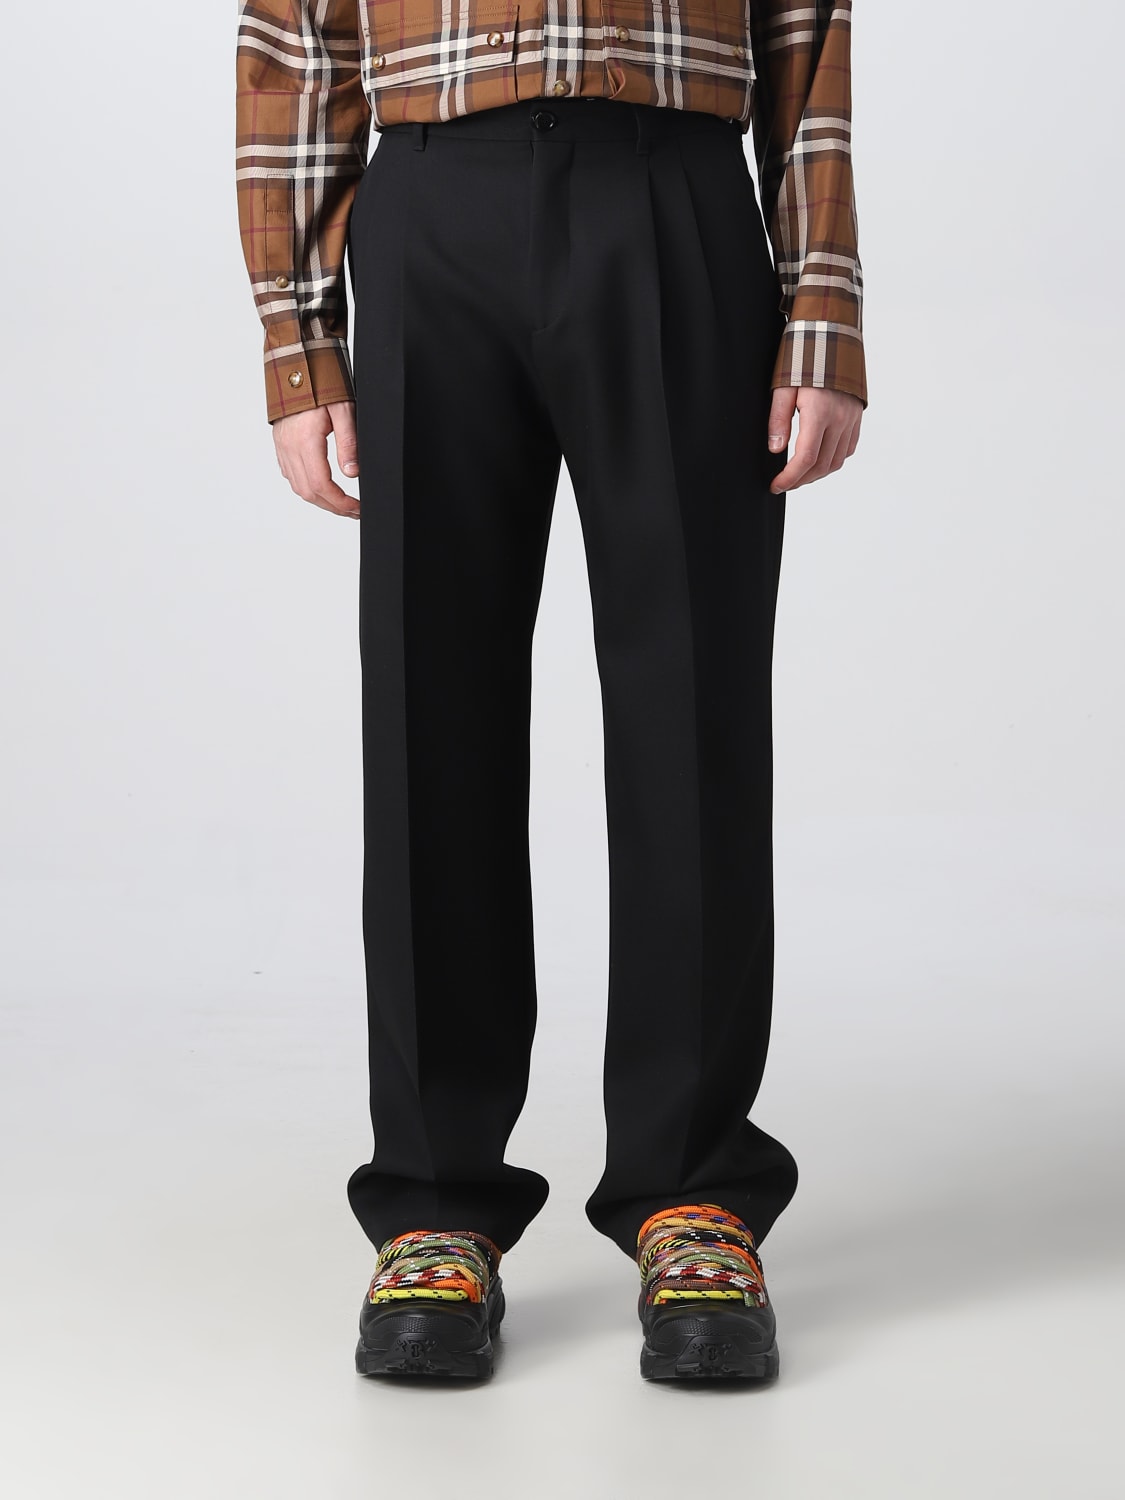 Burberry wool twill trousers